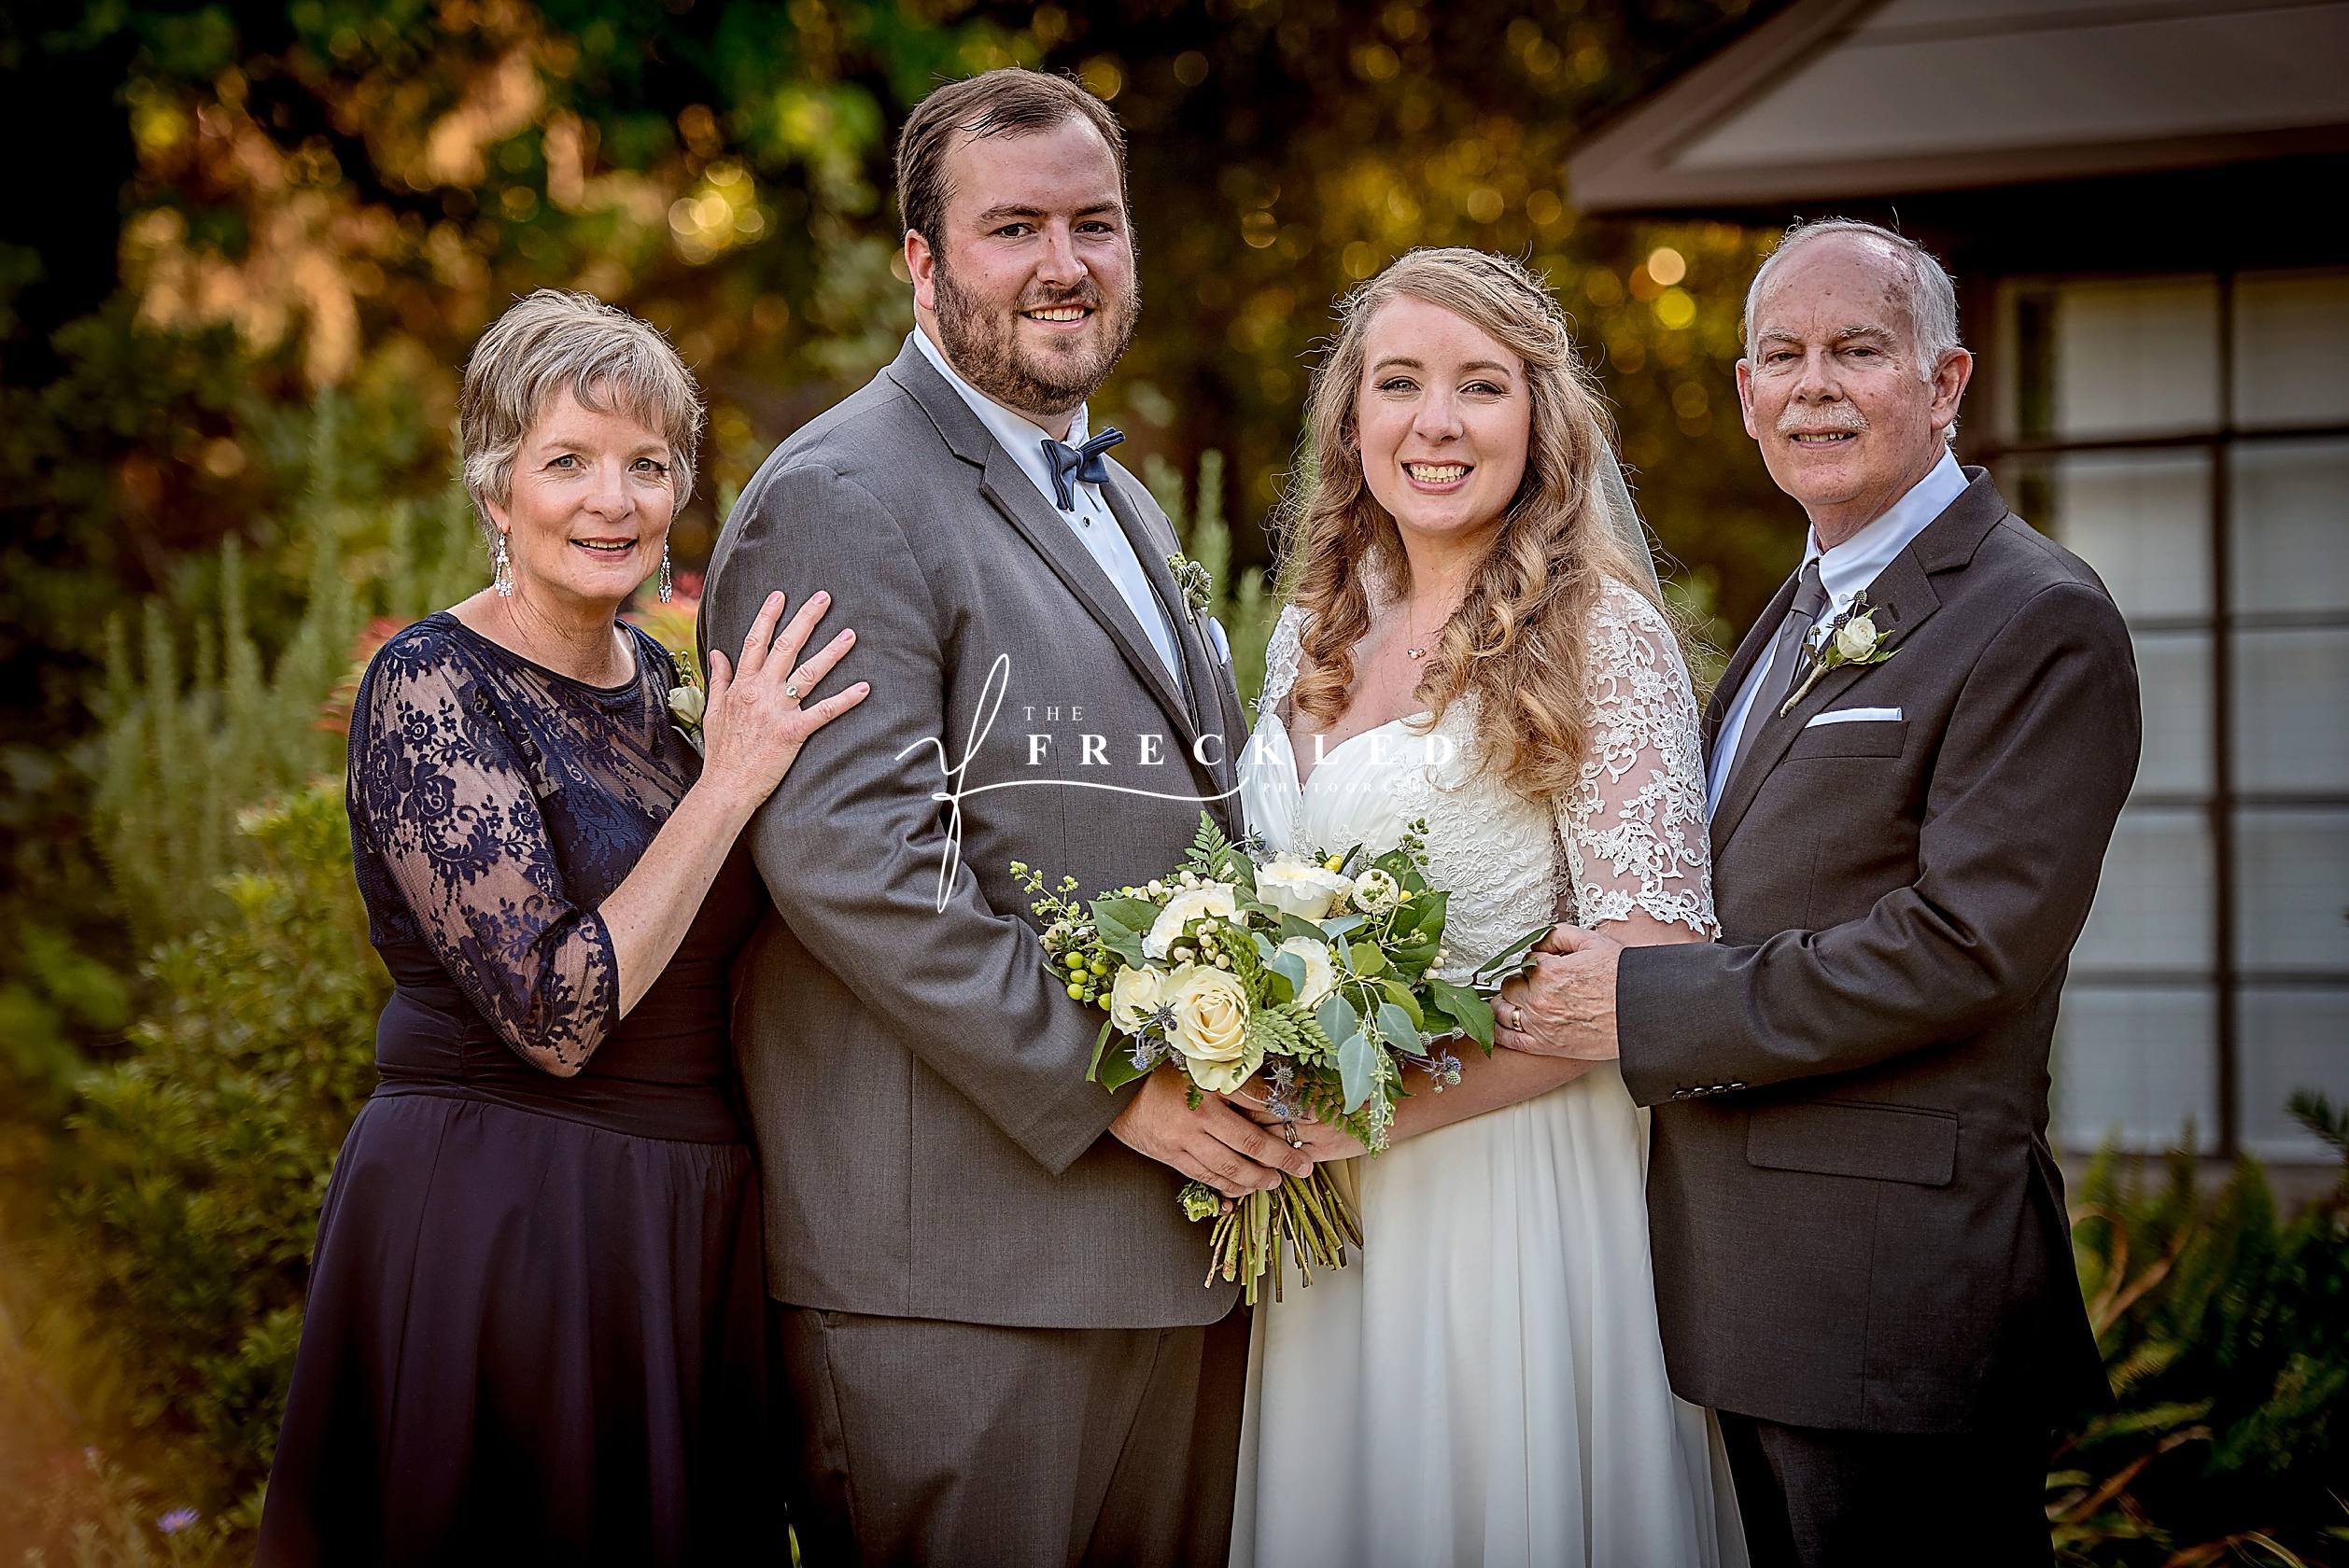 Wedding Family Portraits Keeping It Simple The Freckled Photographer